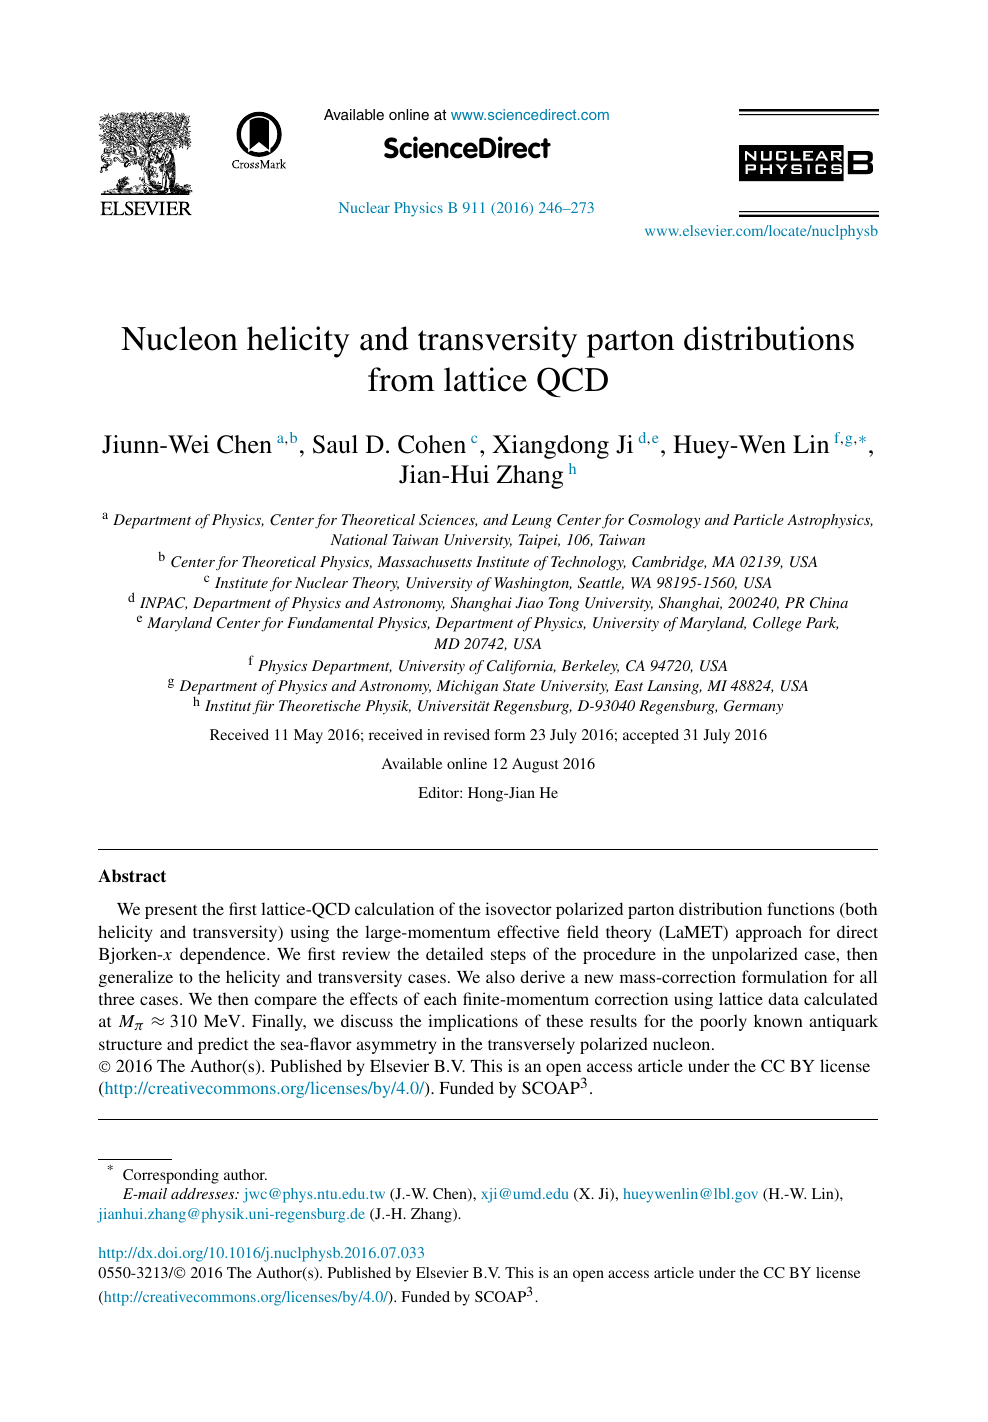 Nucleon Helicity And Transversity Parton Distributions From Lattice Qcd Topic Of Research Paper In Physical Sciences Download Scholarly Article Pdf And Read For Free On Cyberleninka Open Science Hub